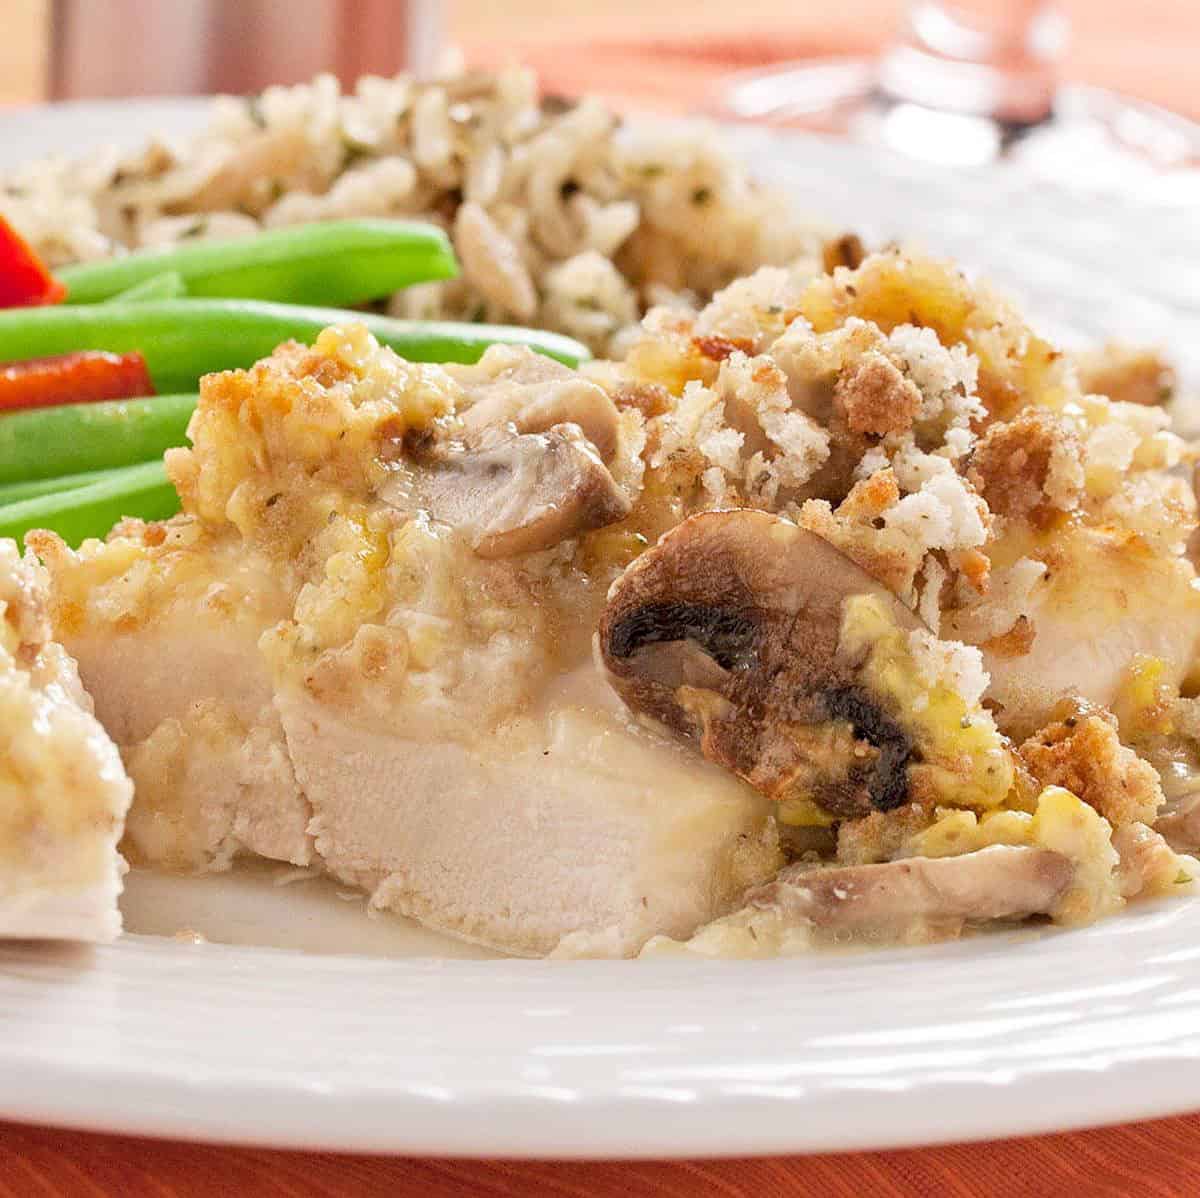  Infuse your dinner with elegance and simplicity with this chicken recipe.